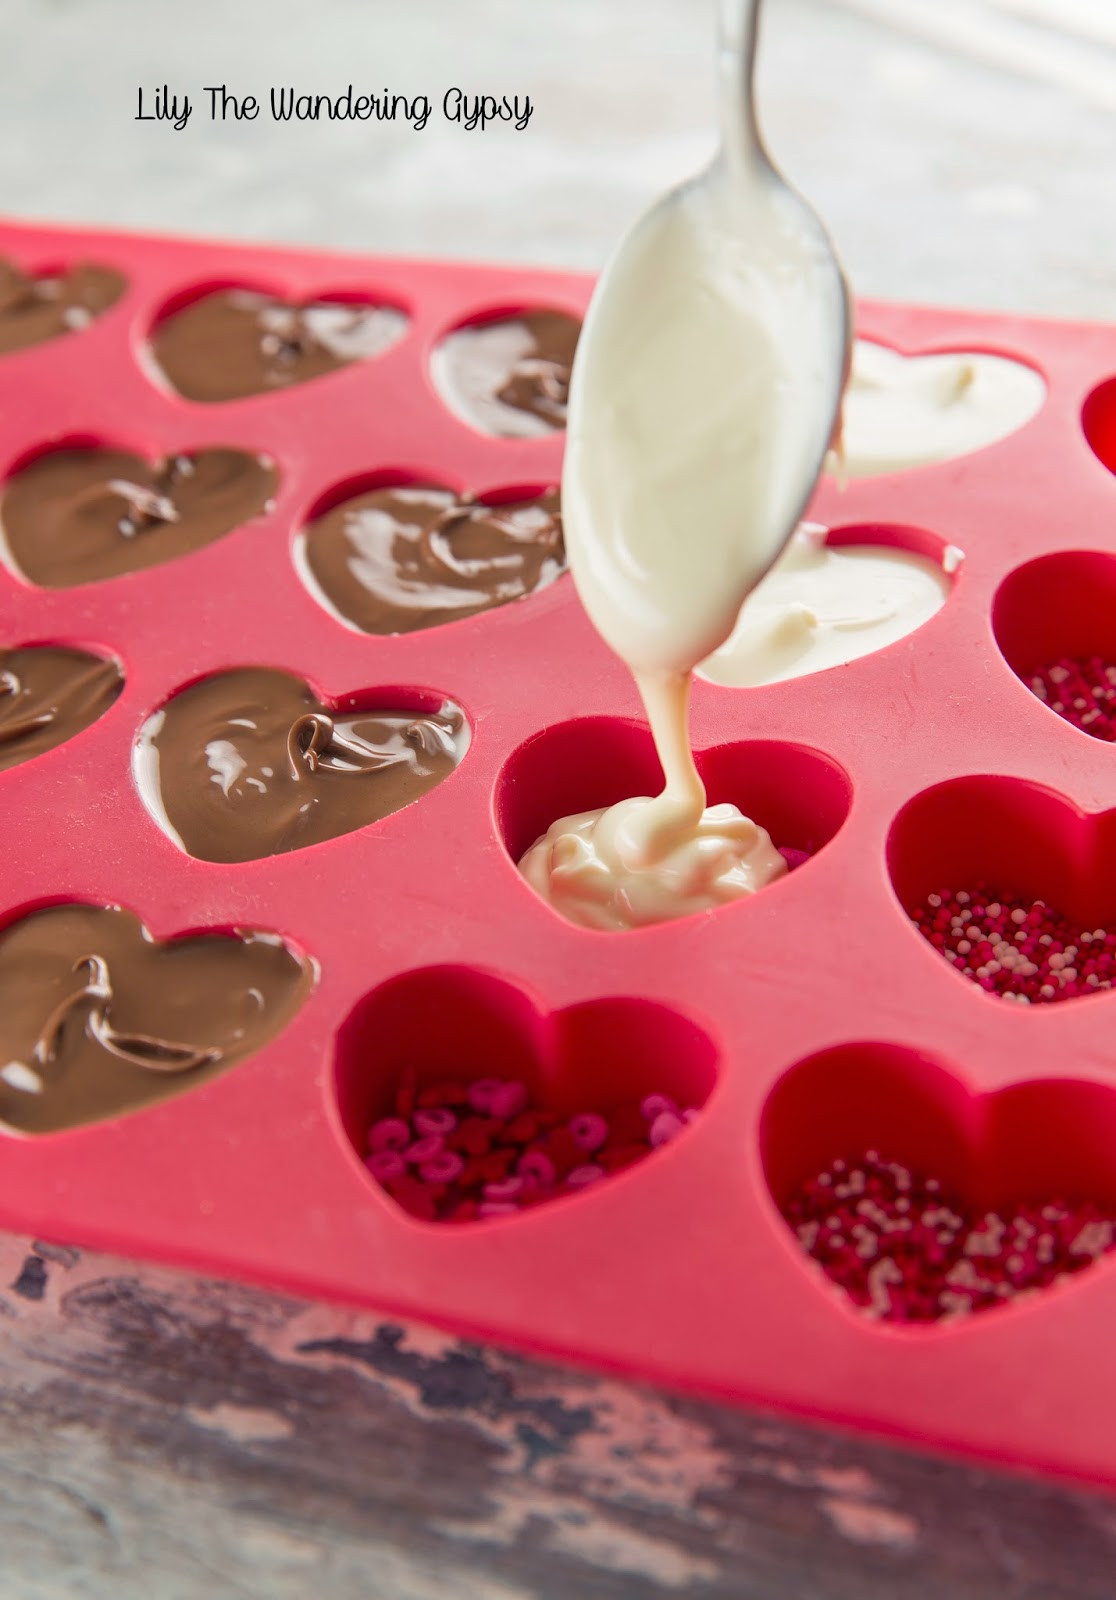 Gourmet Christmas Candy
 Bisque This Gourmet Chocolate Heart Can s Made At Home